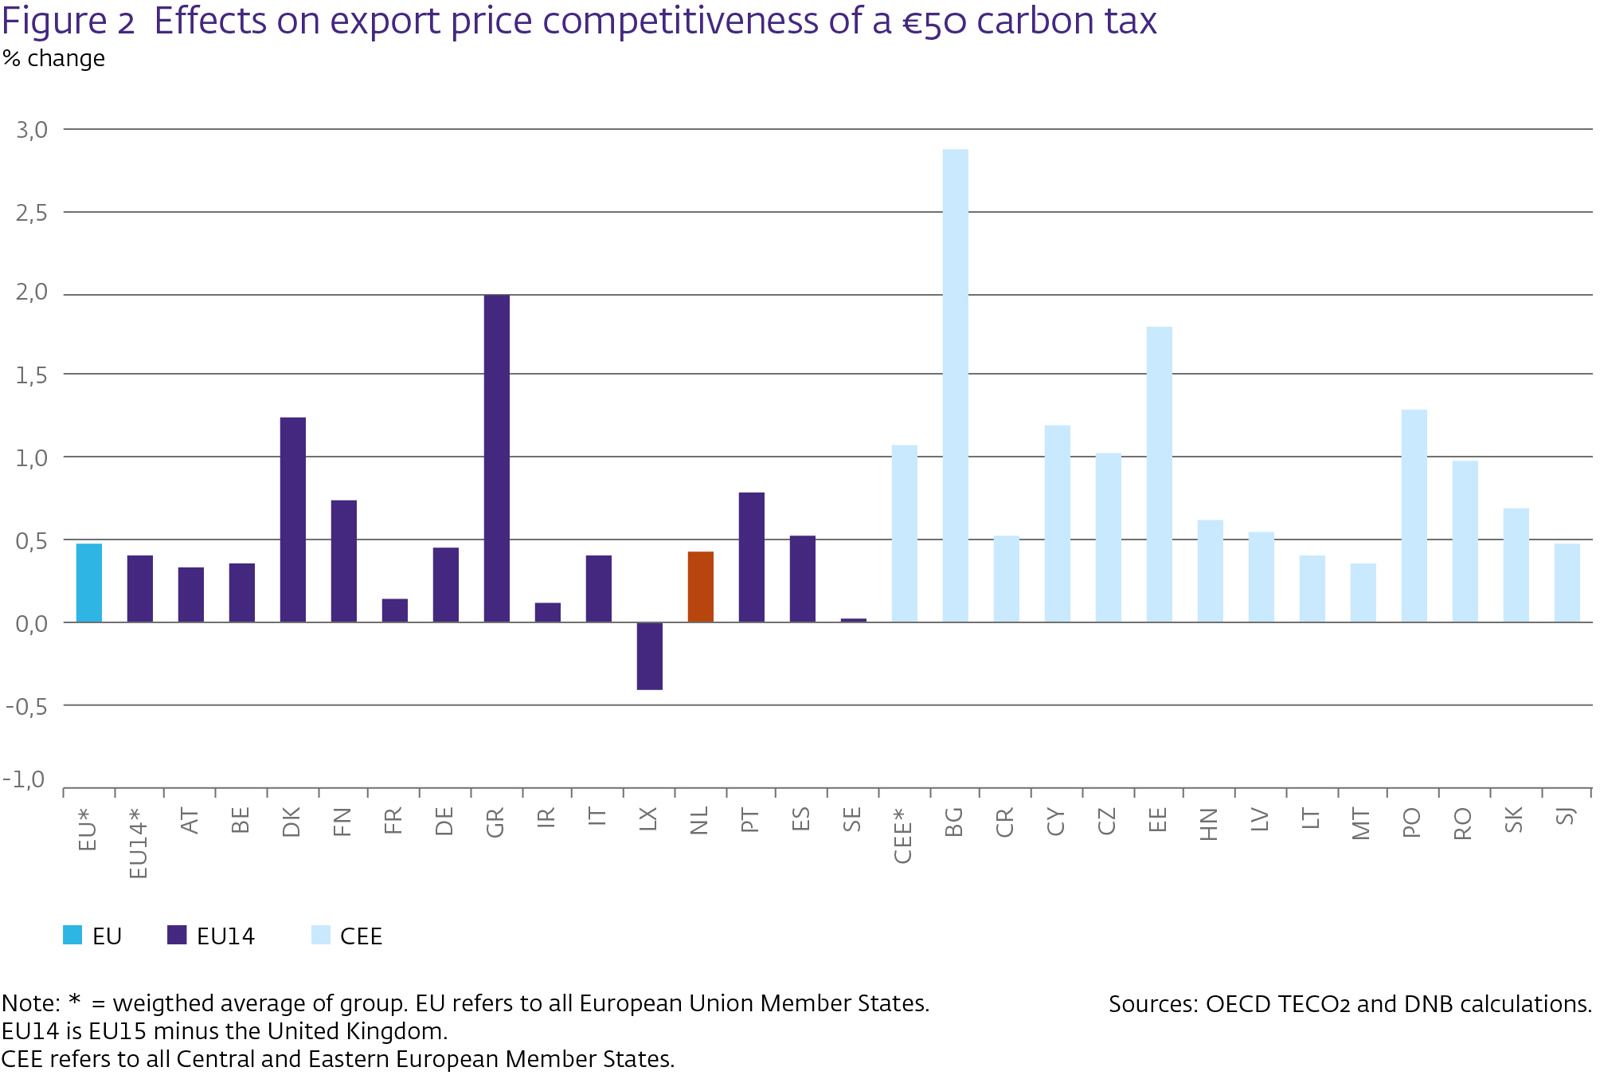 Effects on export price competitiveness of a €50 carbon tax